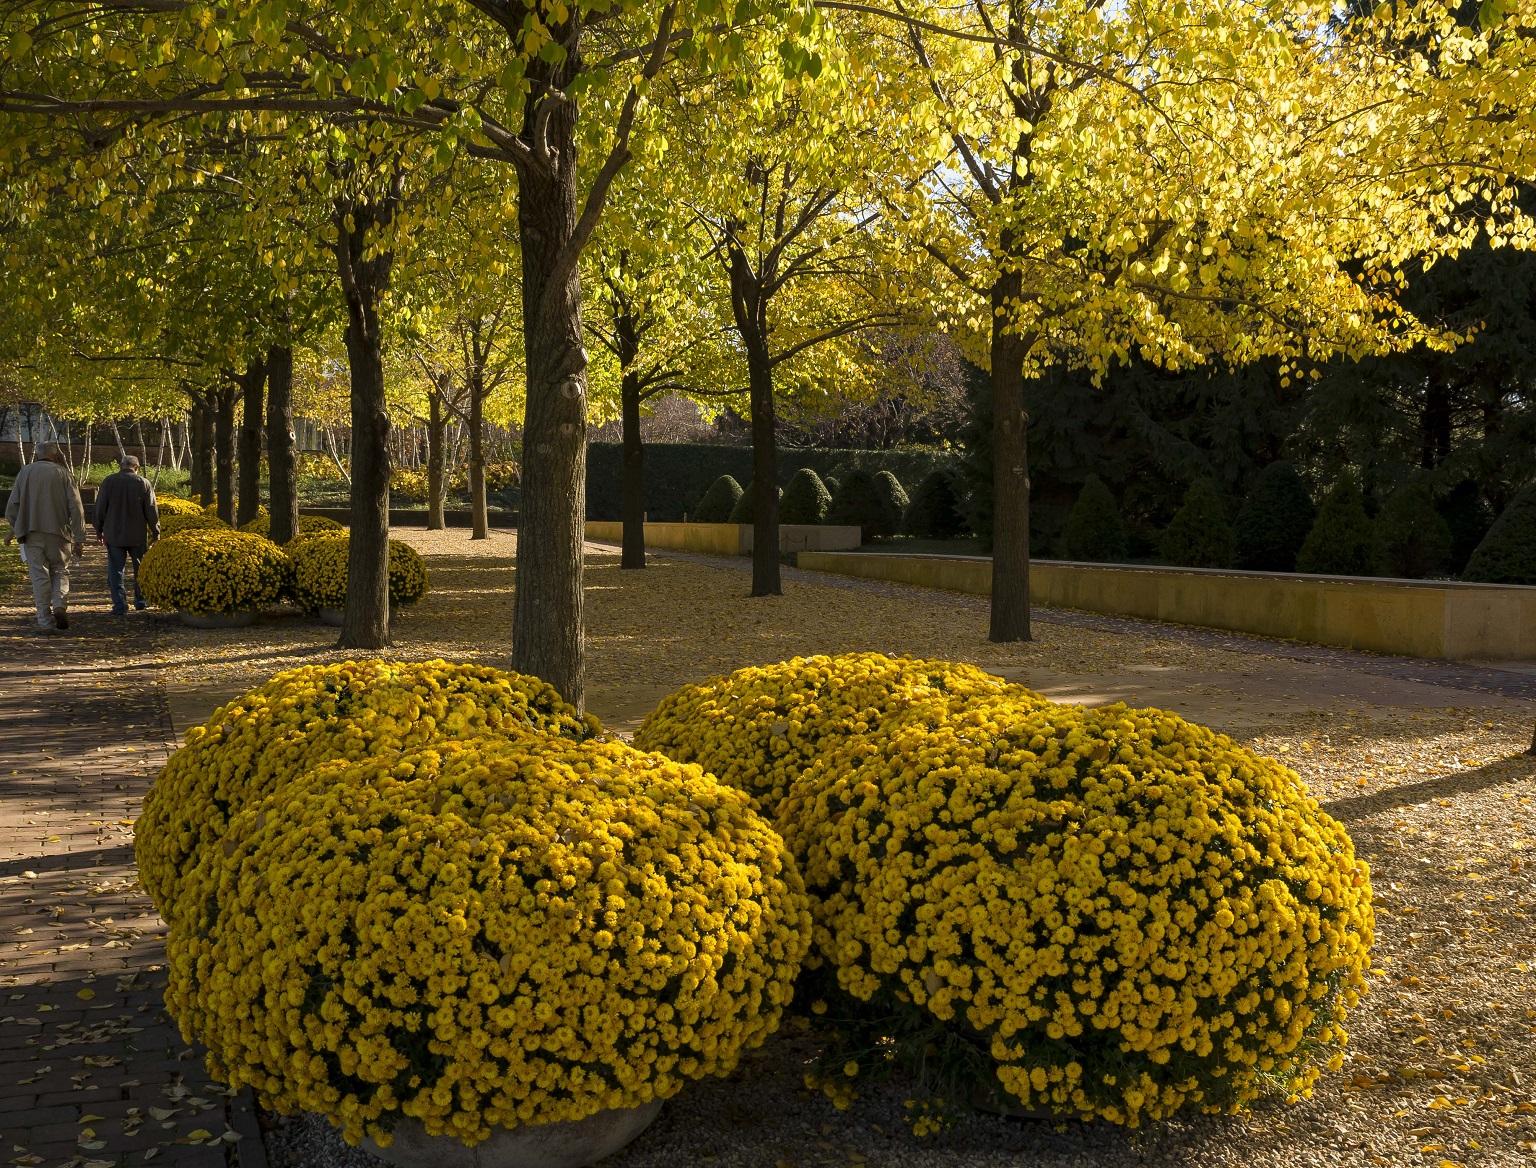 Bright gold colors on display this fall in the Esplanade at the Chicago Botanic Garden (Courtesy Chicago Botanic Garden)